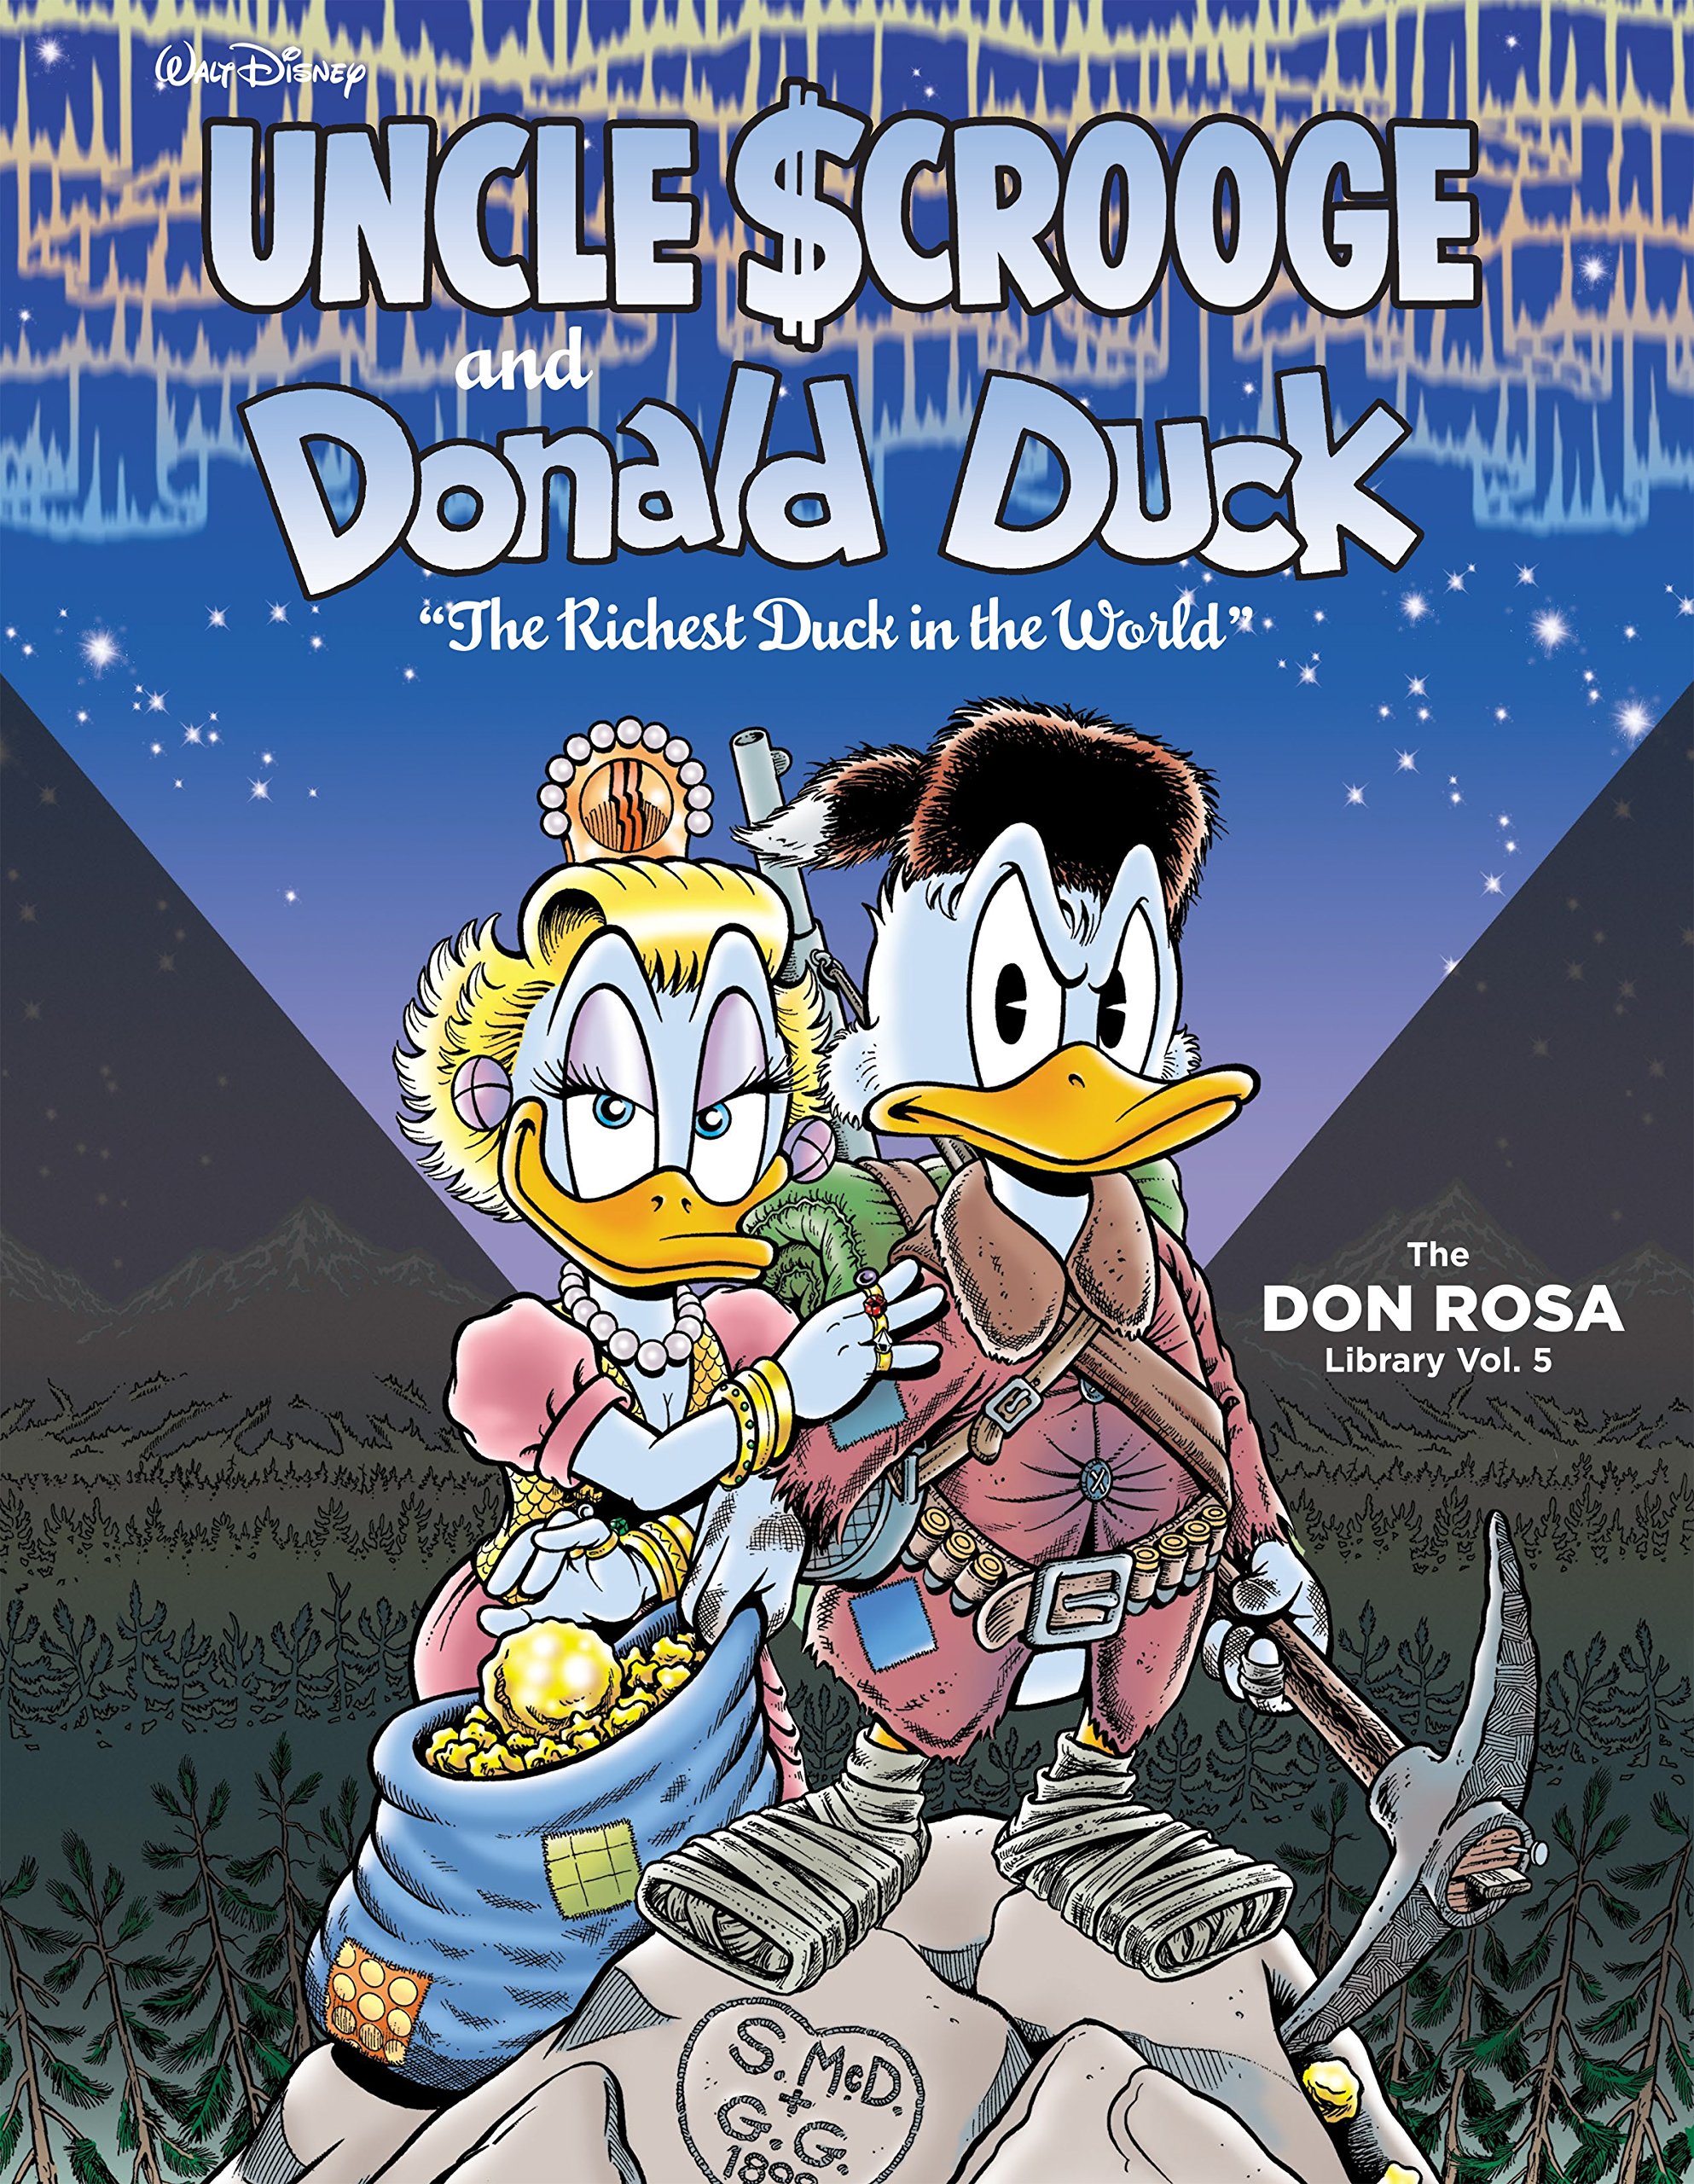 Walt Disney Uncle Scrooge and Donald Duck Vol. 5: The Richest Duck in the World: The Don Rosa Library Vol. 5